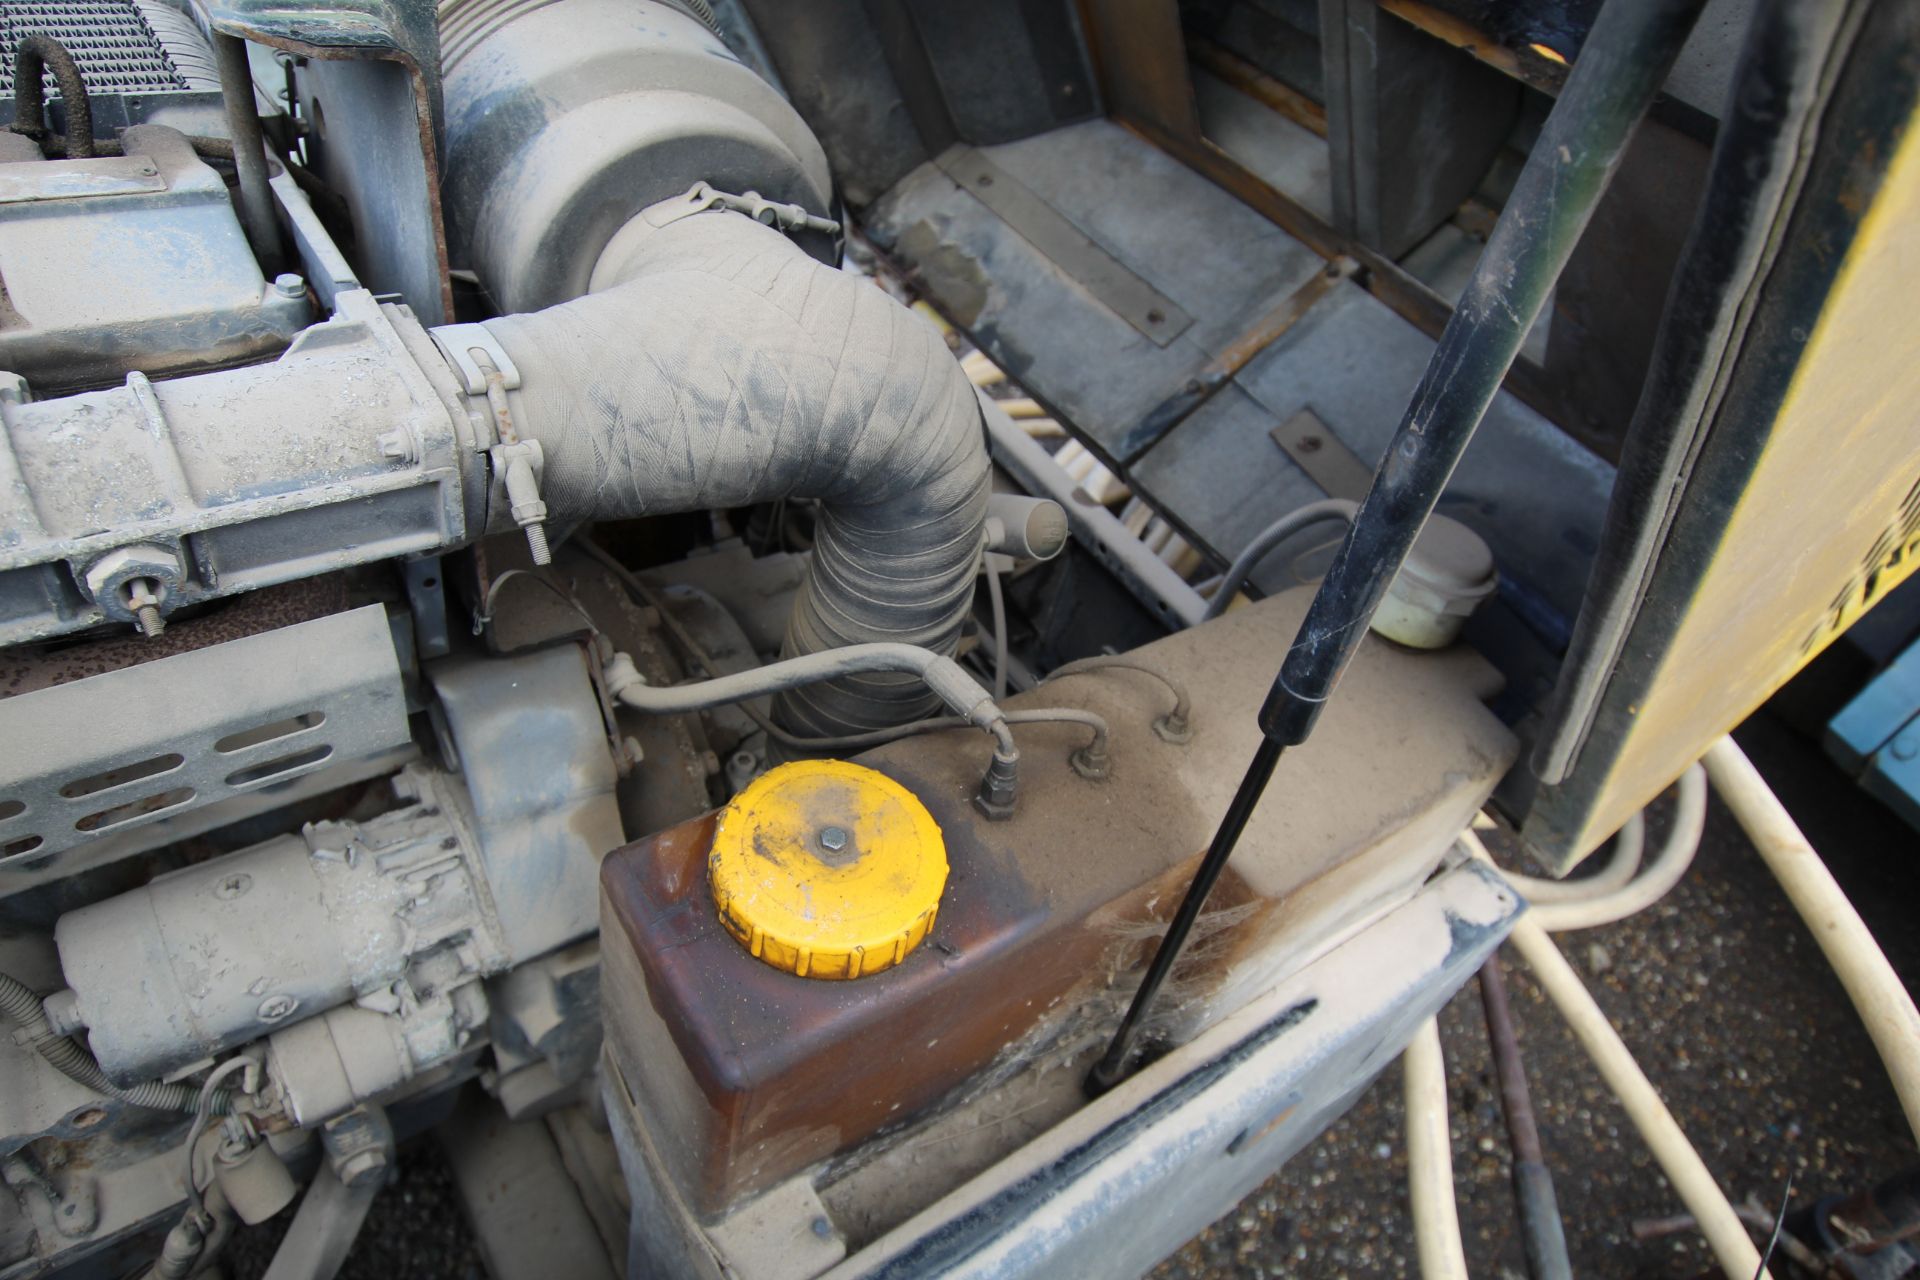 Road tow compressor. With pipes, lance and breaker - Image 28 of 28